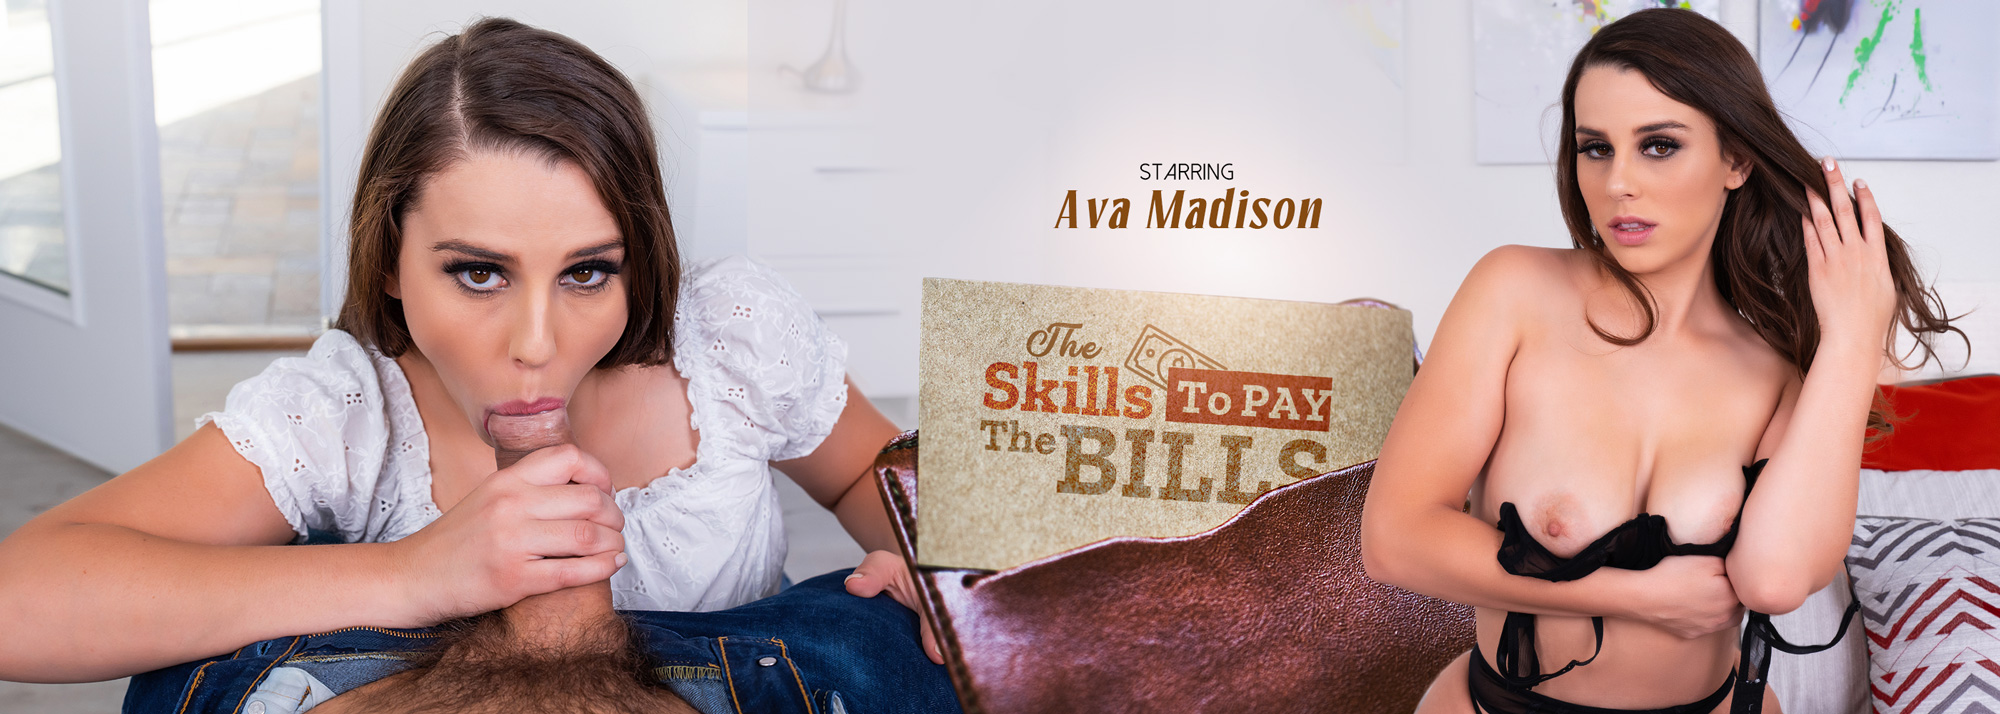 The Skills to Pay the Bills - VR Porn Video, Starring: Ava Madison